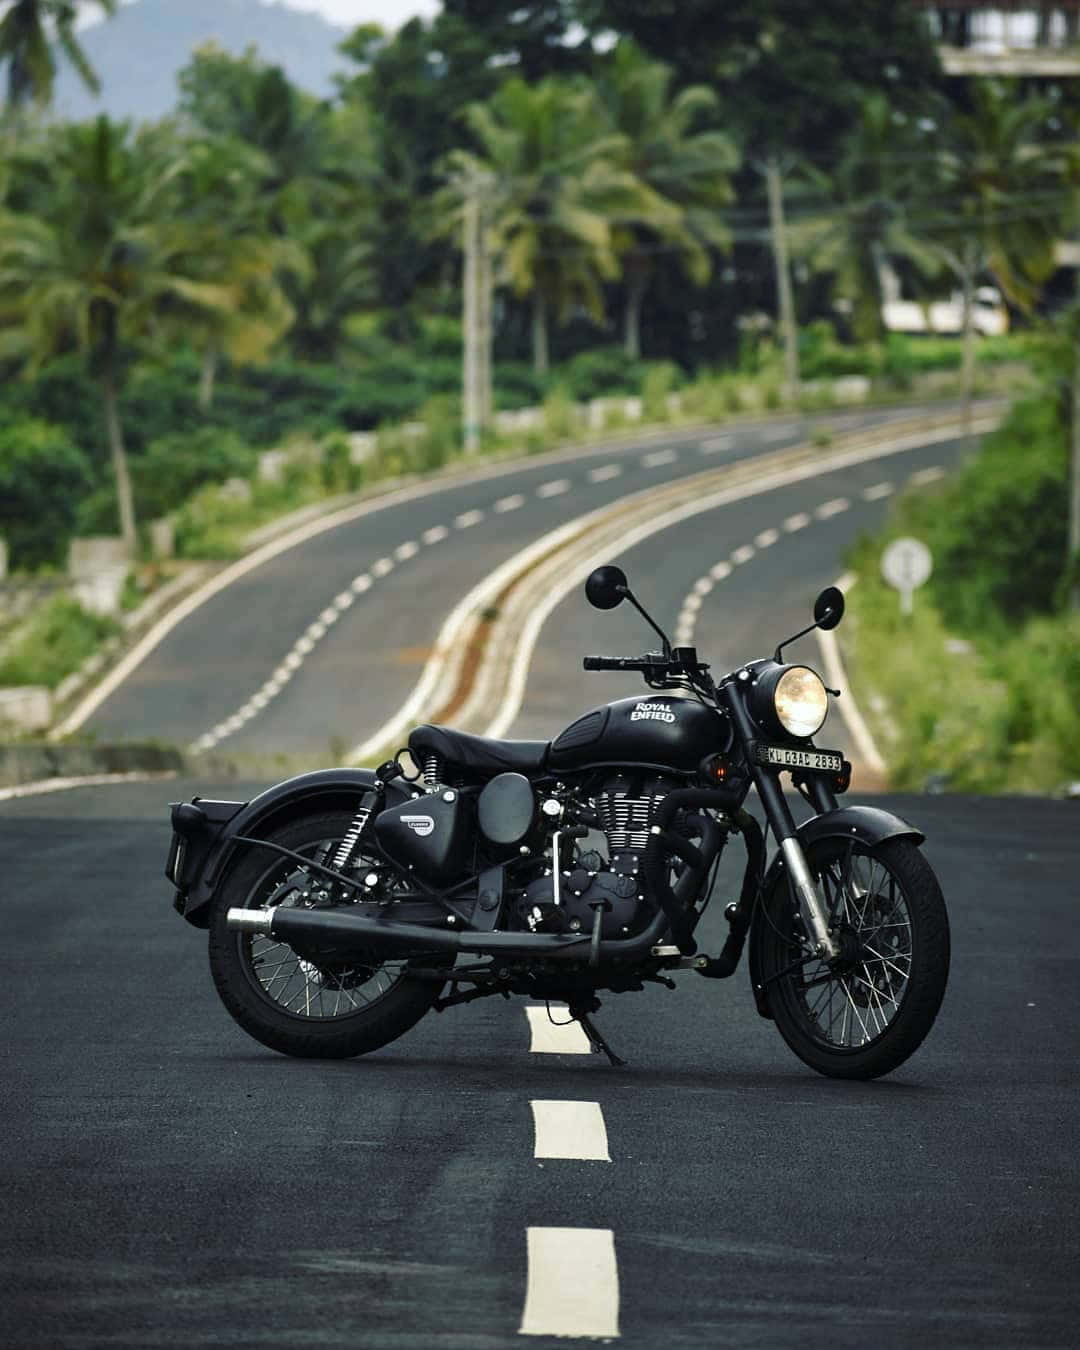 A Black Motorcycle Parked On A Road Near Palm Trees